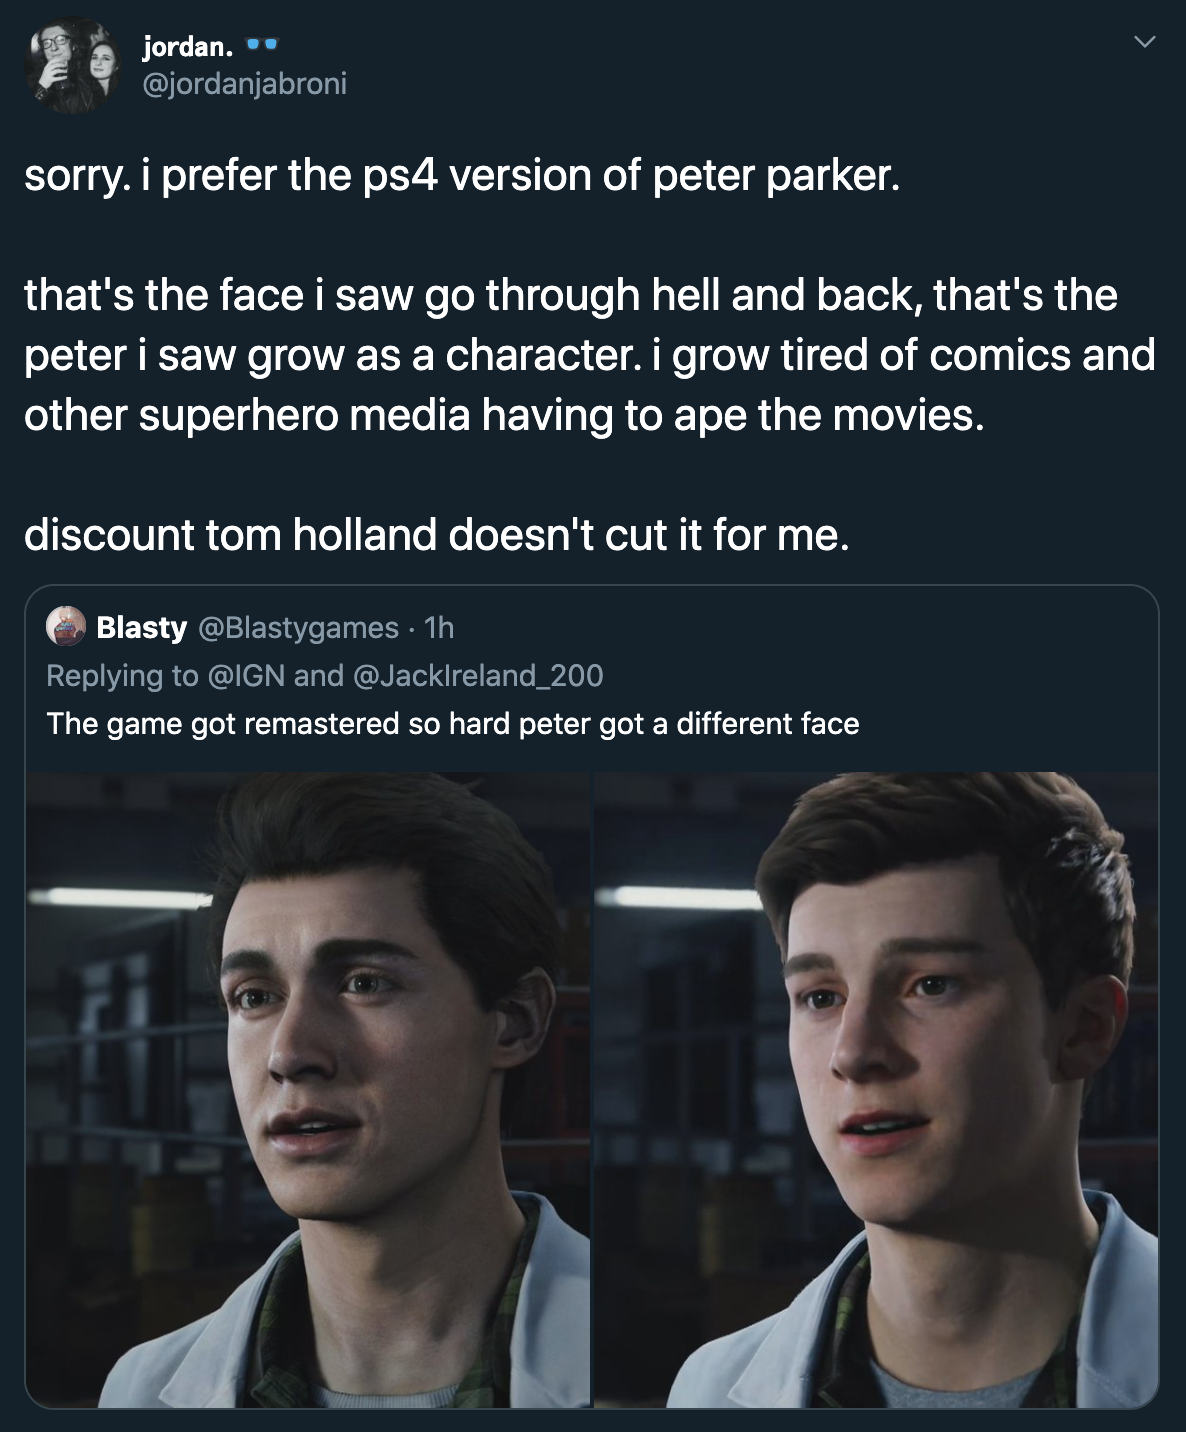 sorry. I prefer the ps4 version of peter parker. that's the face i saw go through hell and back, that's the peter i saw grow as a character. i grow tired of comics and other superhero media having to ape the movies.